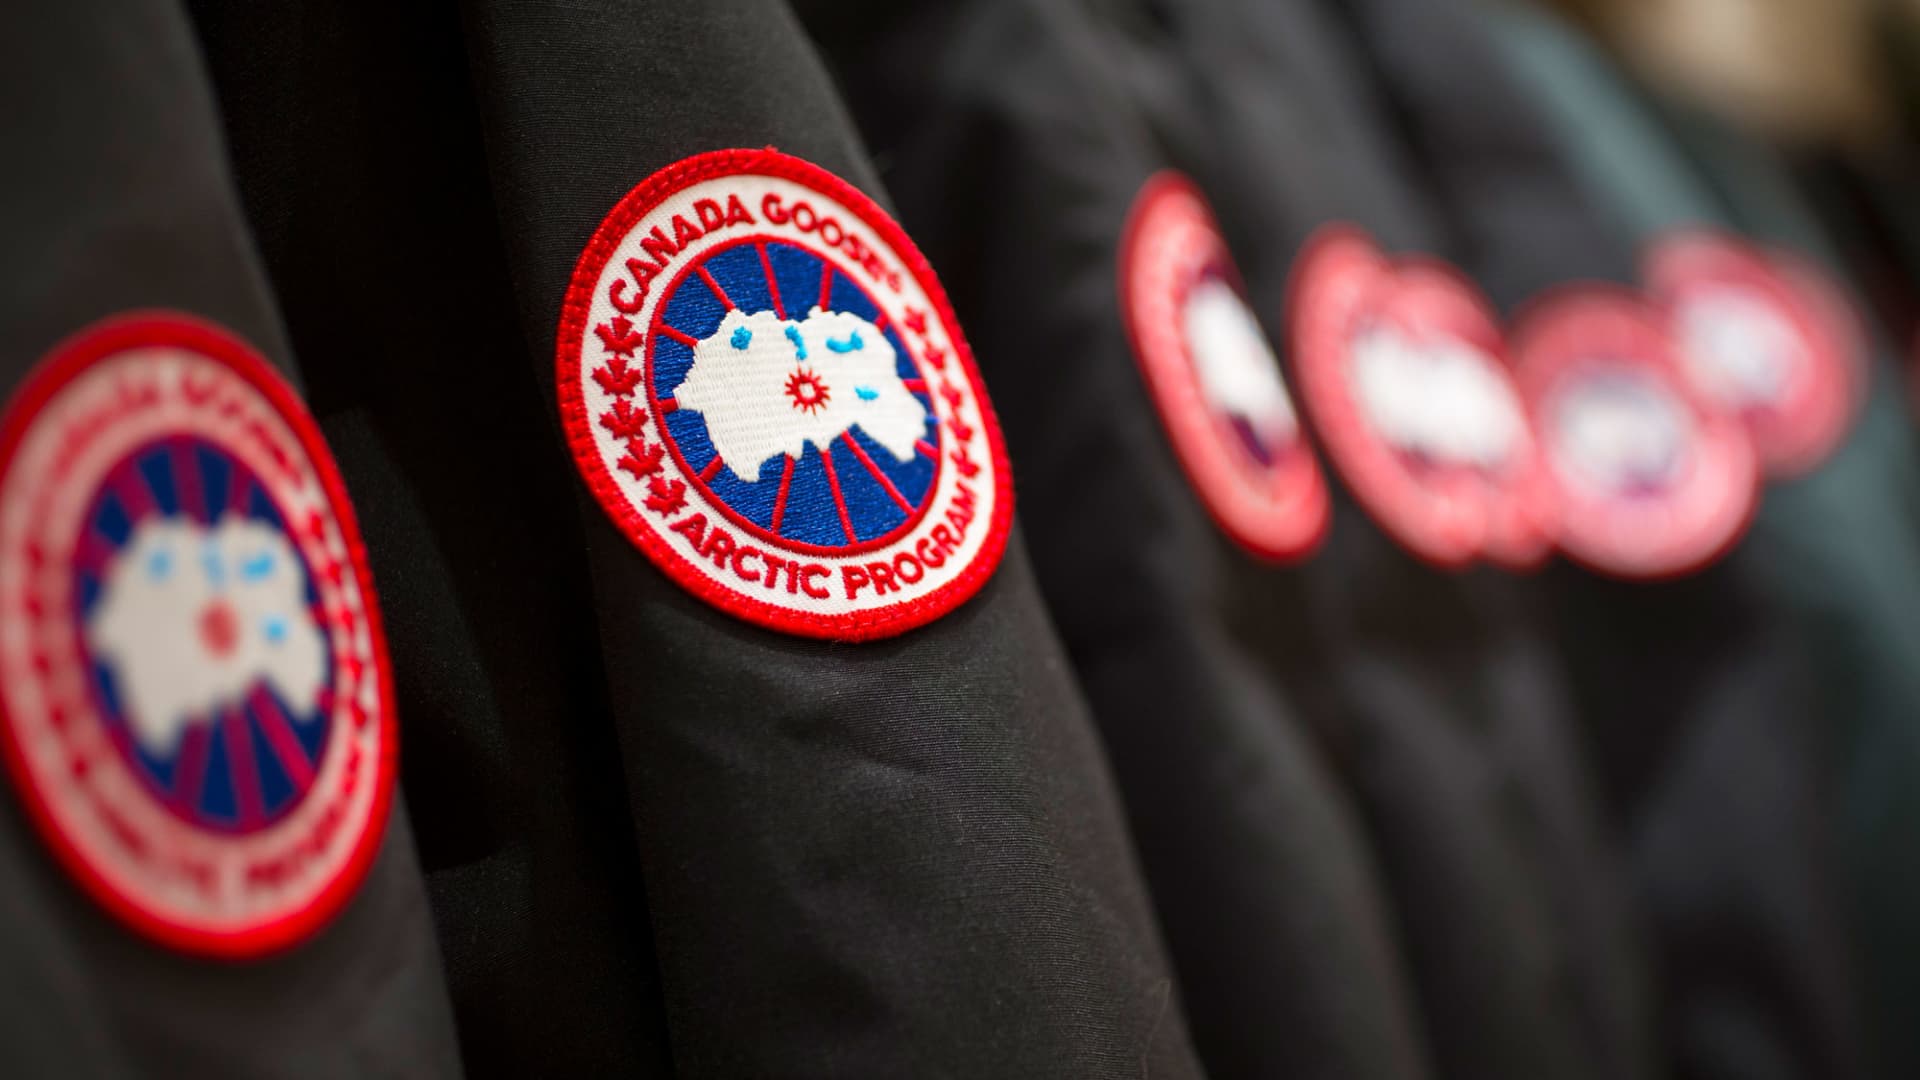 Canada Goose to chop 17% of its company workforce, following string of retail layoffs